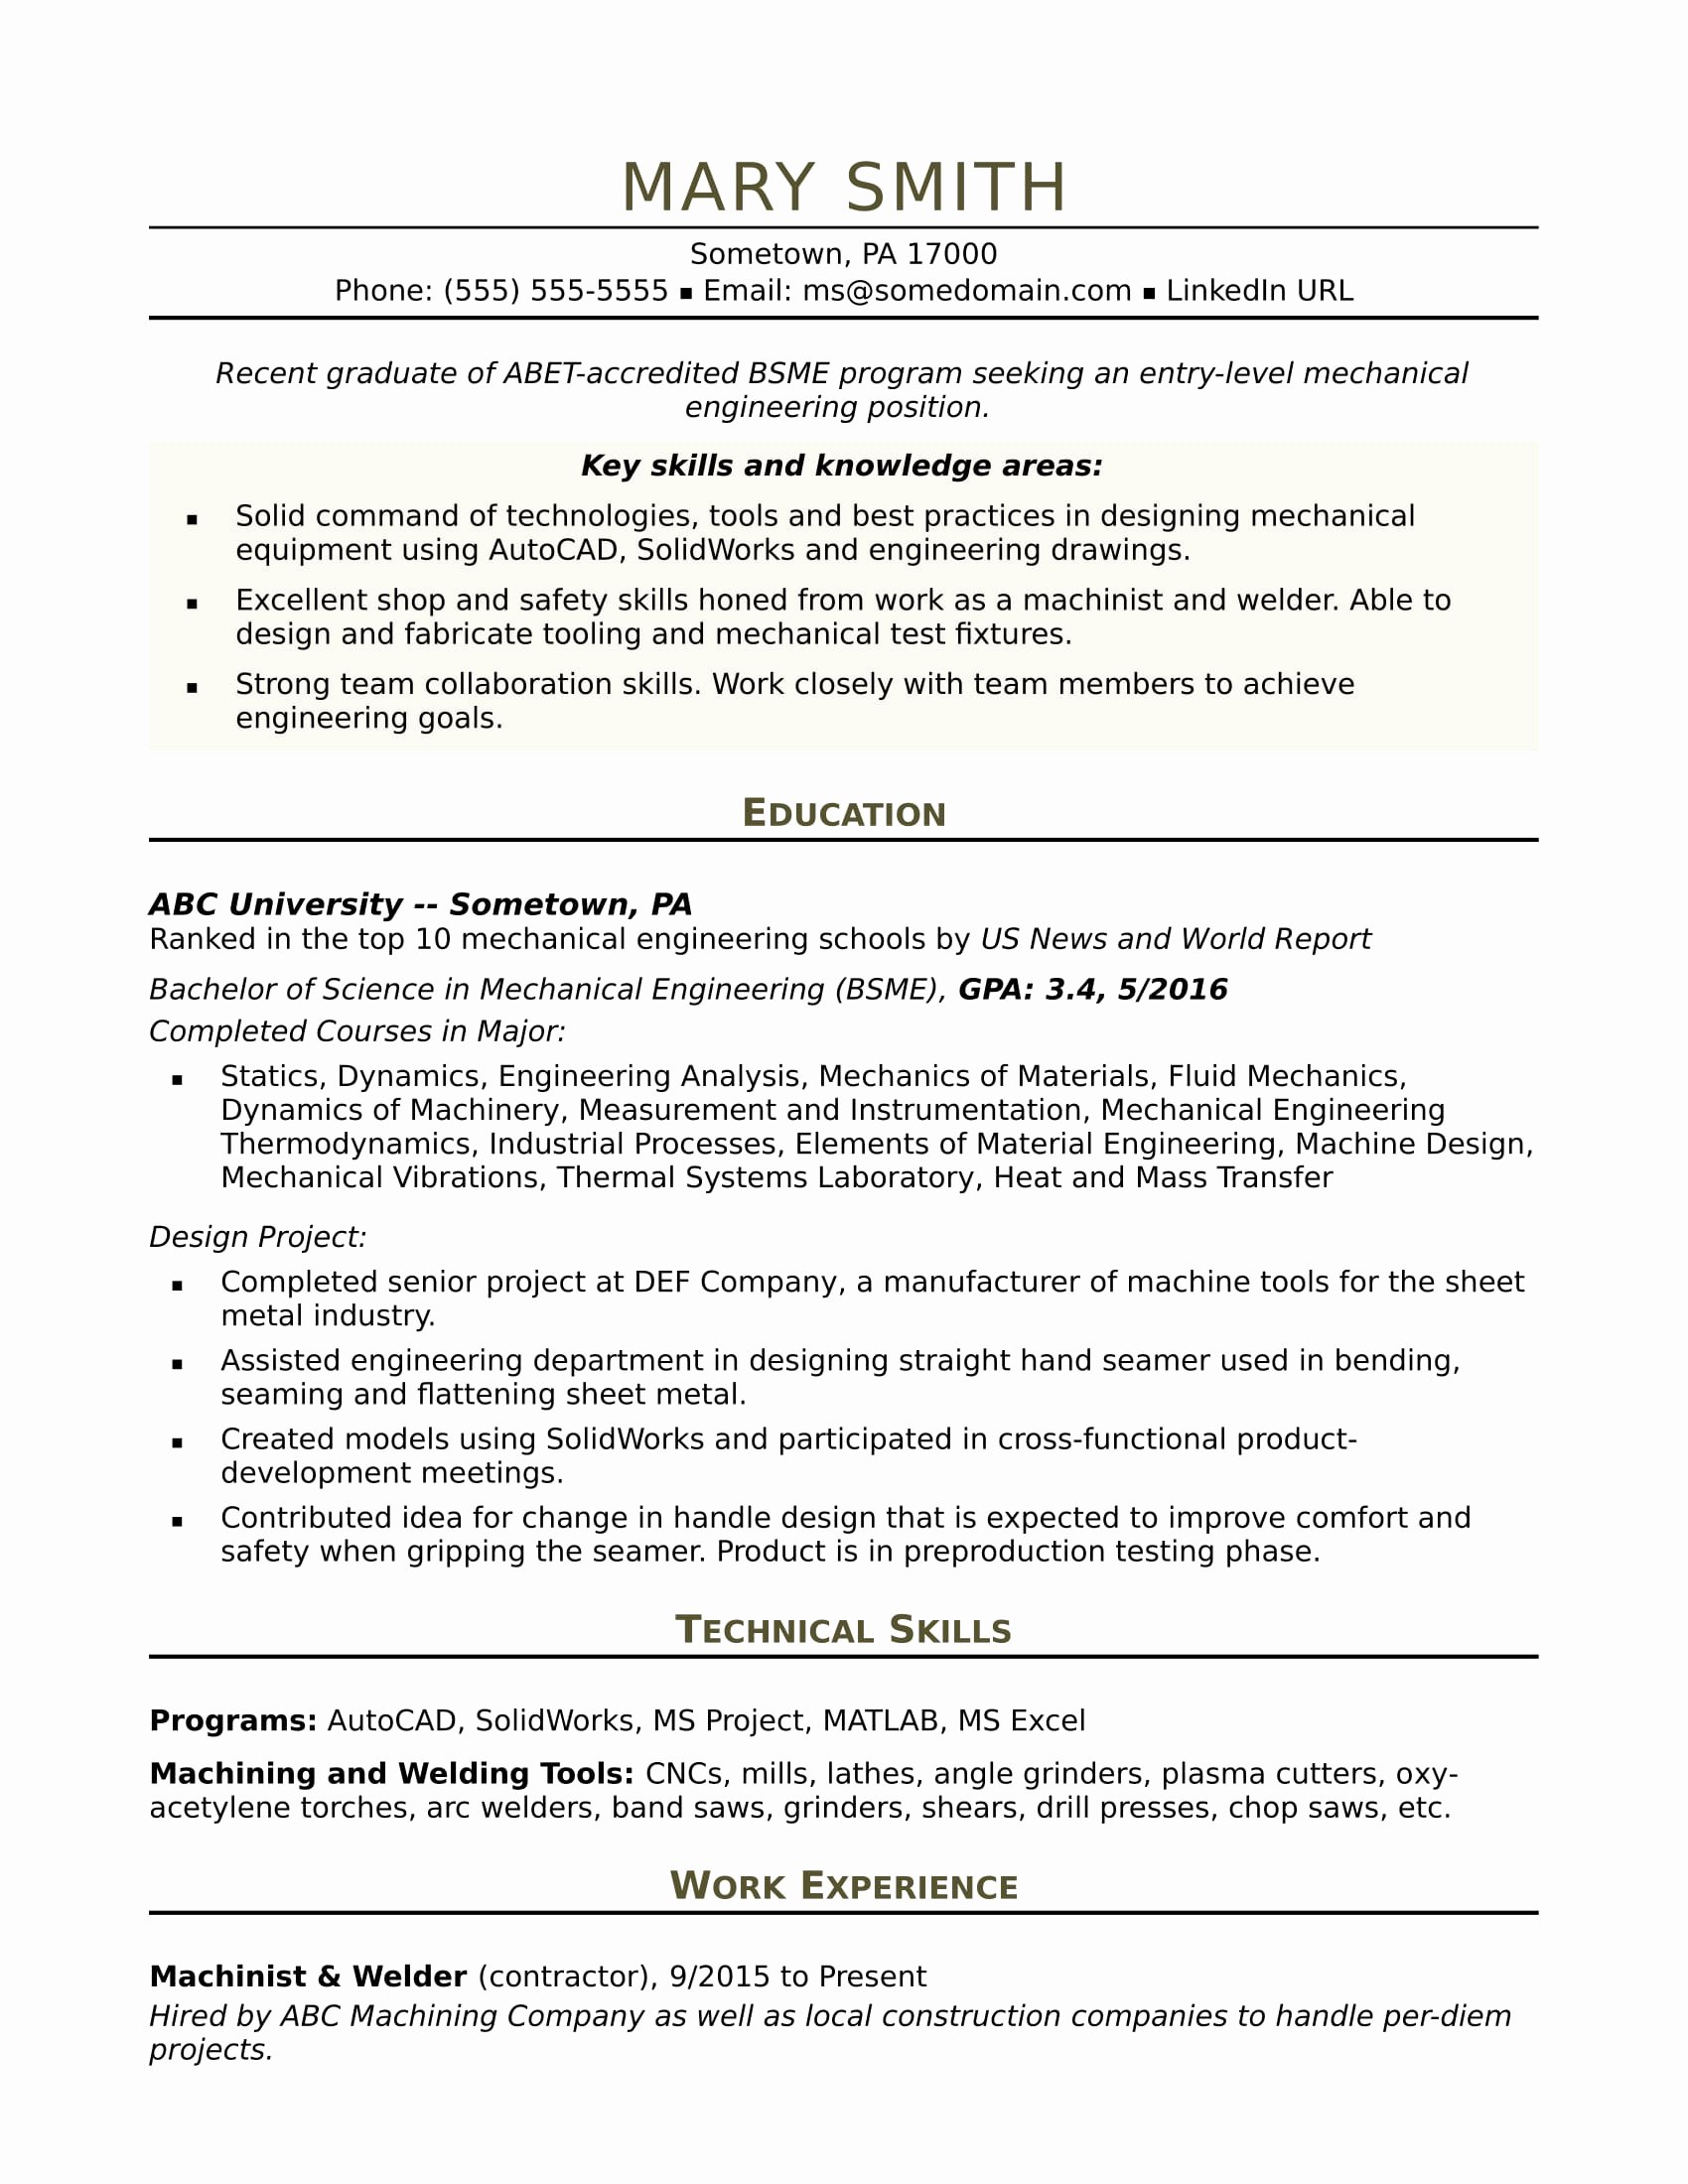 Mechanical Engineer Resume Template Awesome Sample Resume for An Entry Level Mechanical Engineer